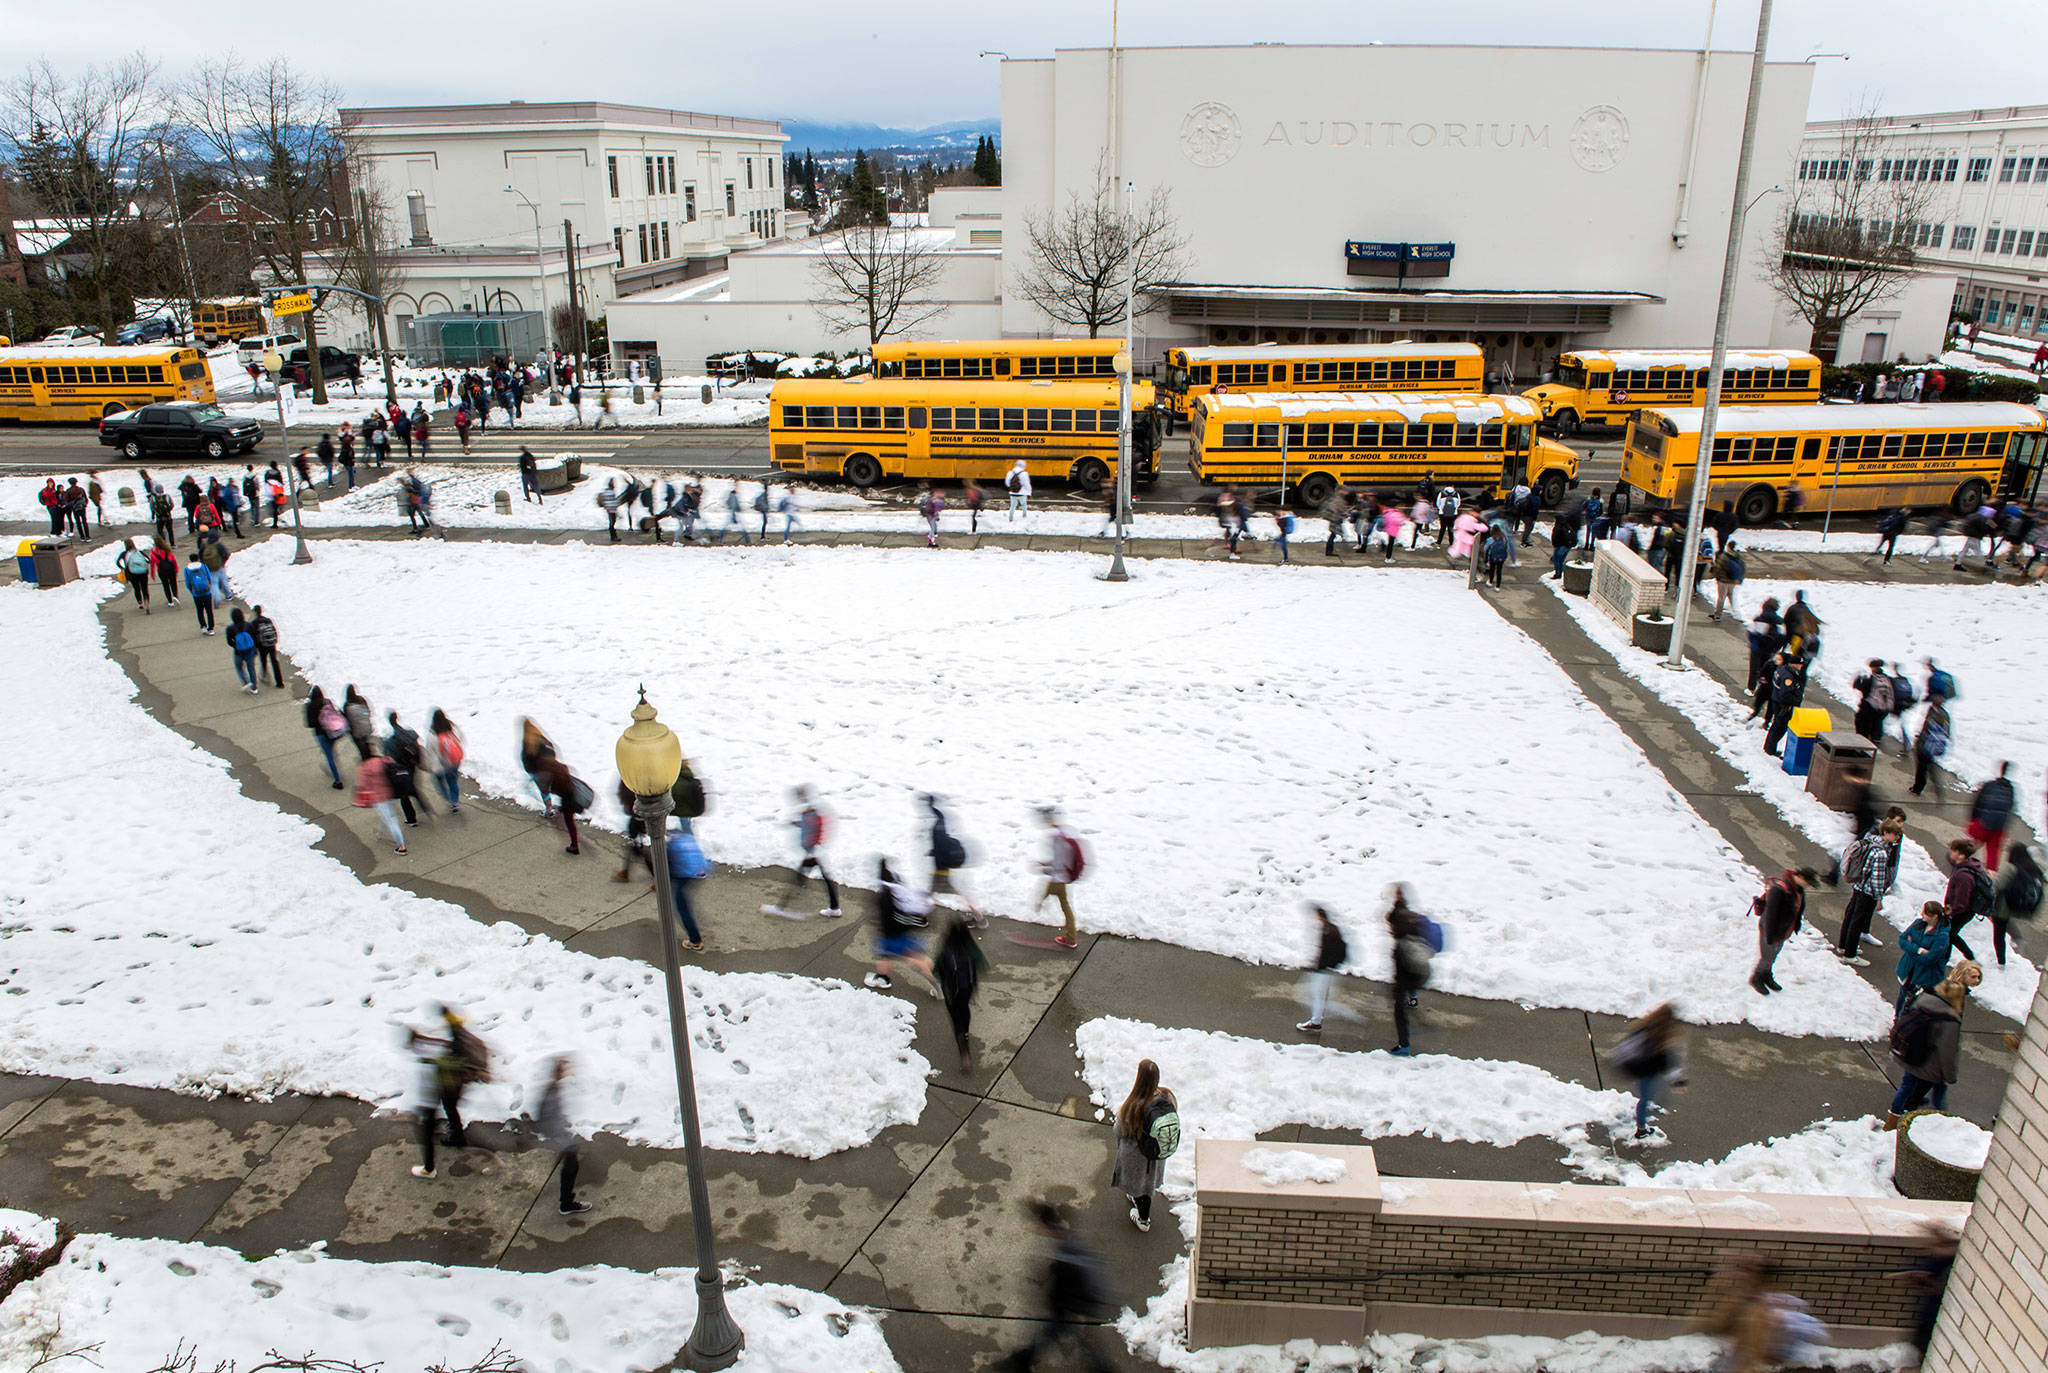 Students exit Everett High School on Feb. 14, which was their first day of school after snow closed classes on Feb. 8. (Olivia Vanni / The Herald)